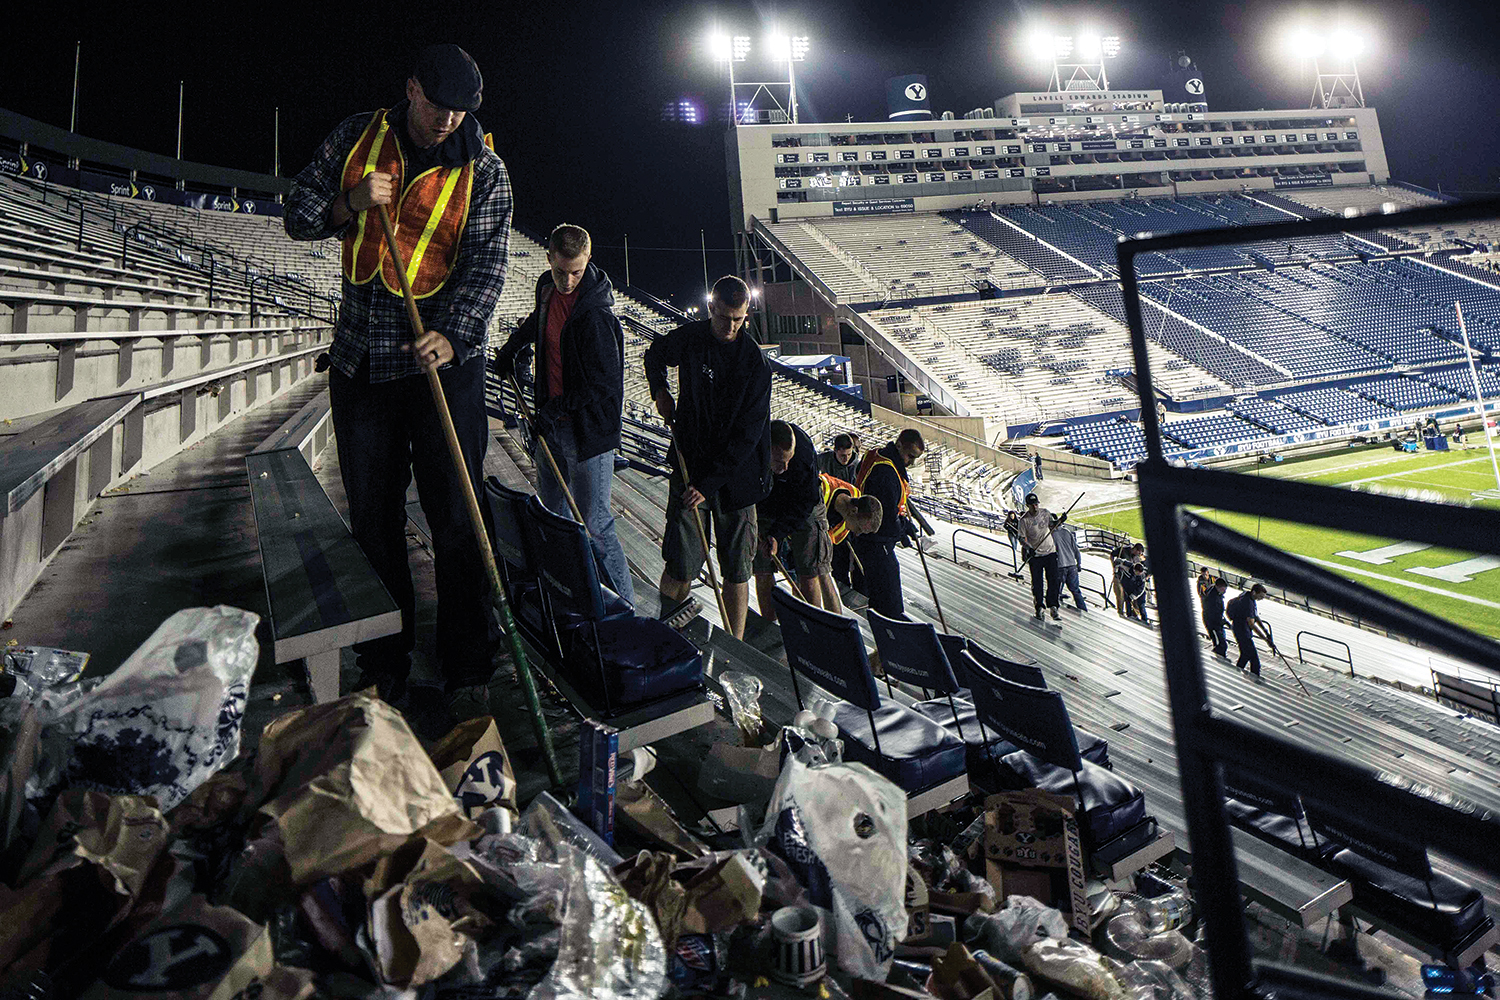 After collecting recyclables, crews sweep trash out of the aisles of the LaVell Edwards Stadium bleachers.